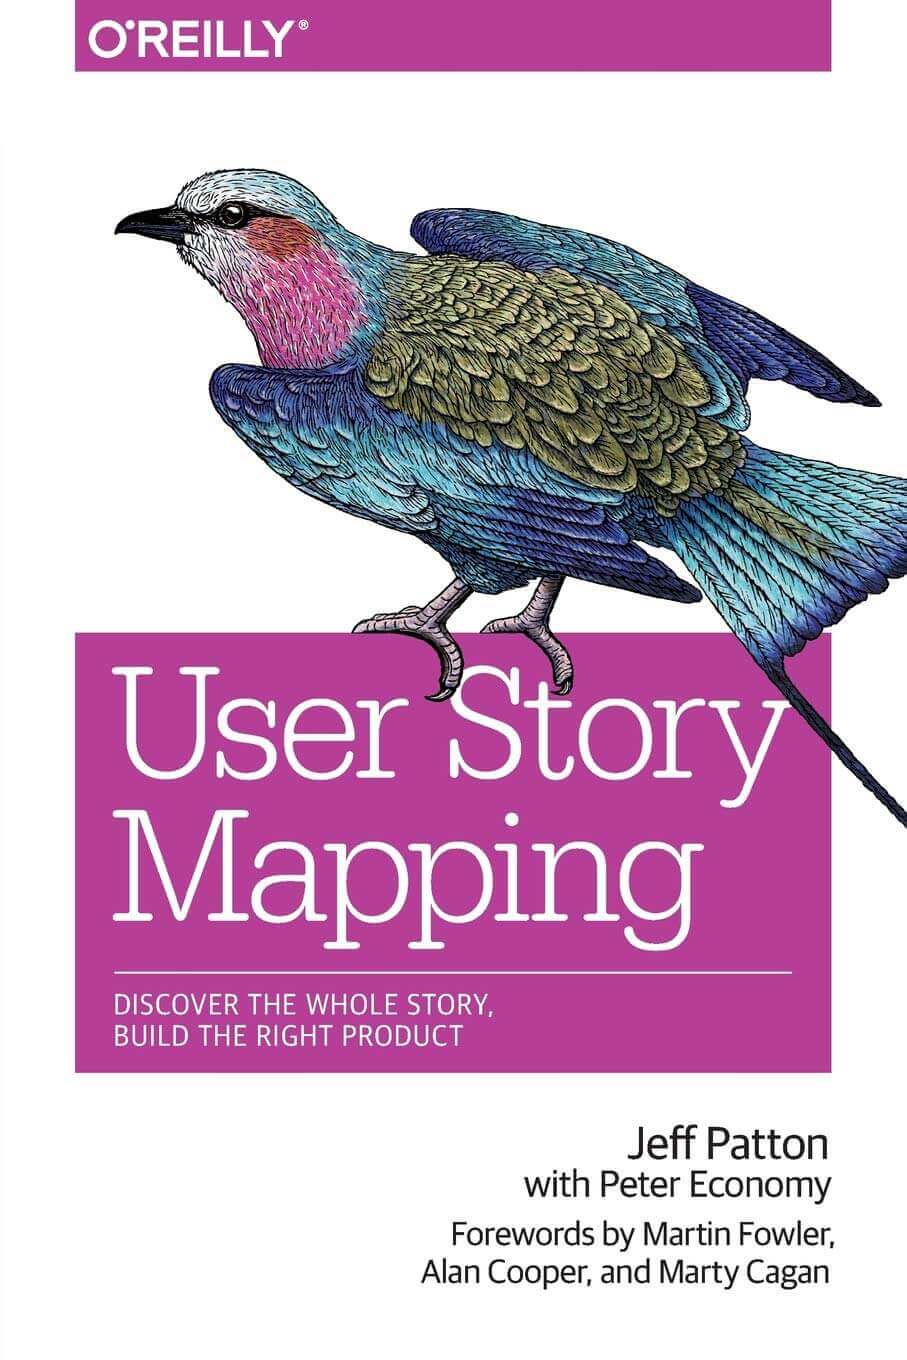 Jeff Patton's book – User Story Mapping: Discover the whole story, build the right product